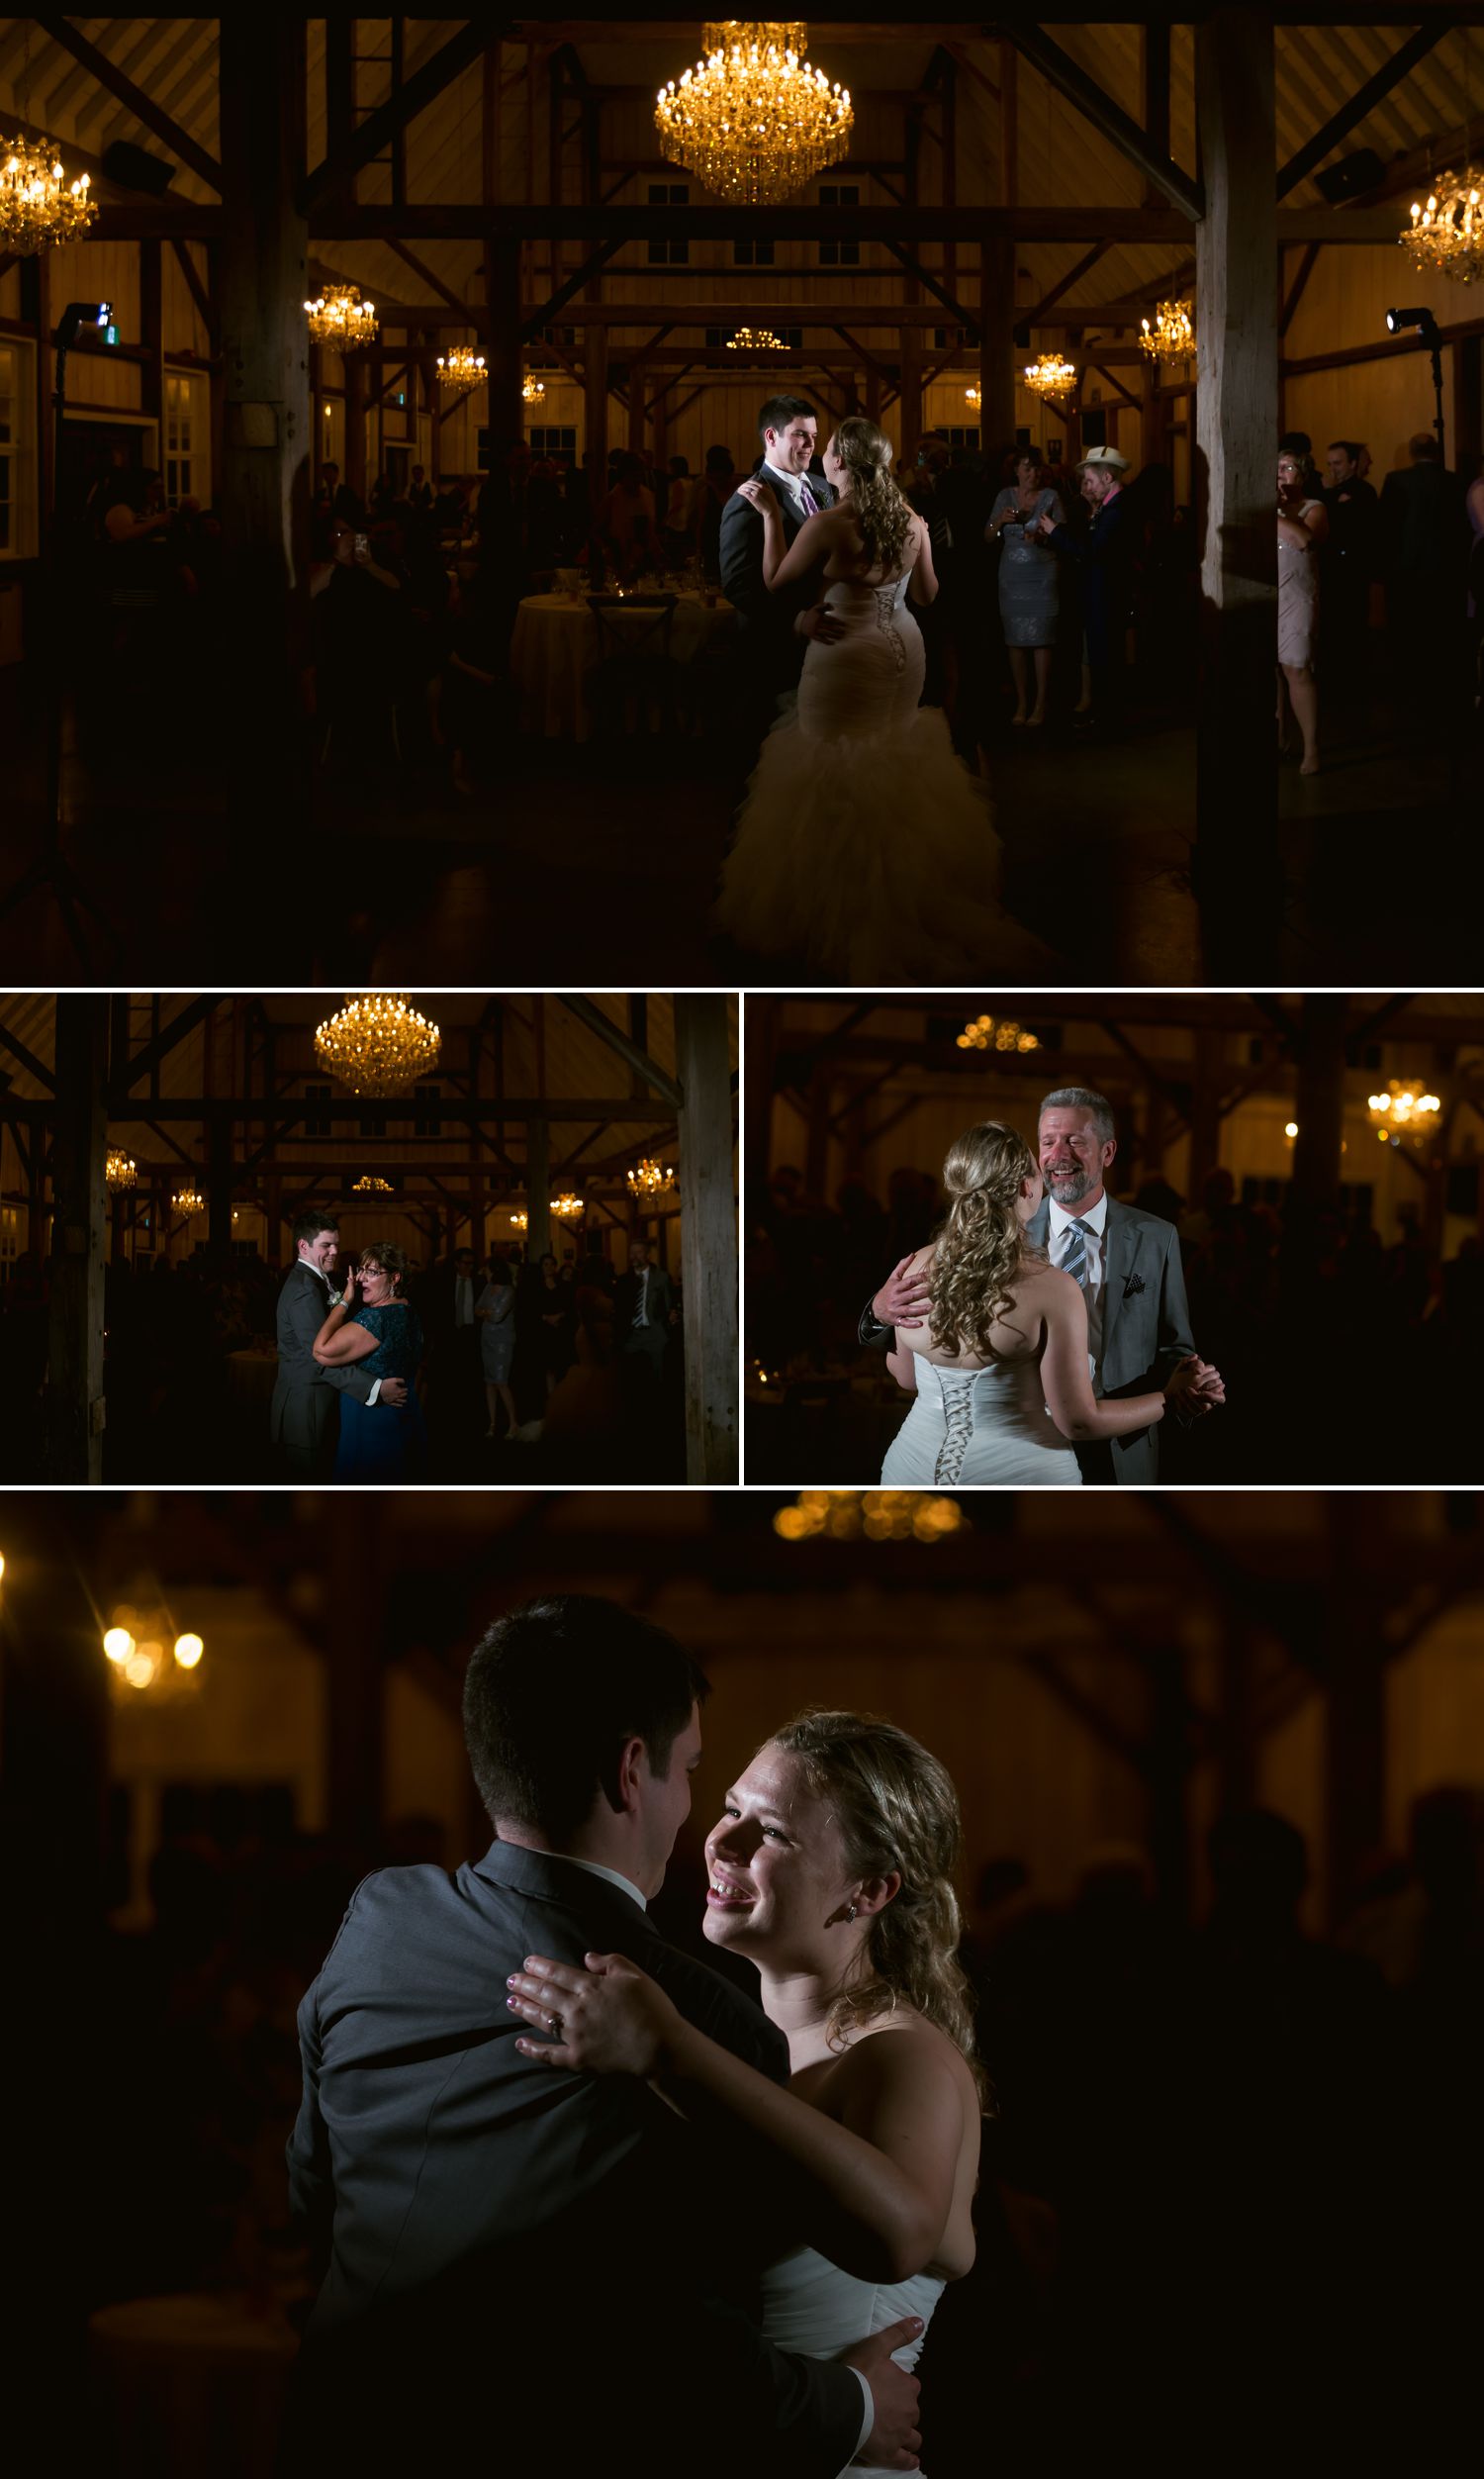 The bride and groom during their first dances together inside the Stonefields Loft